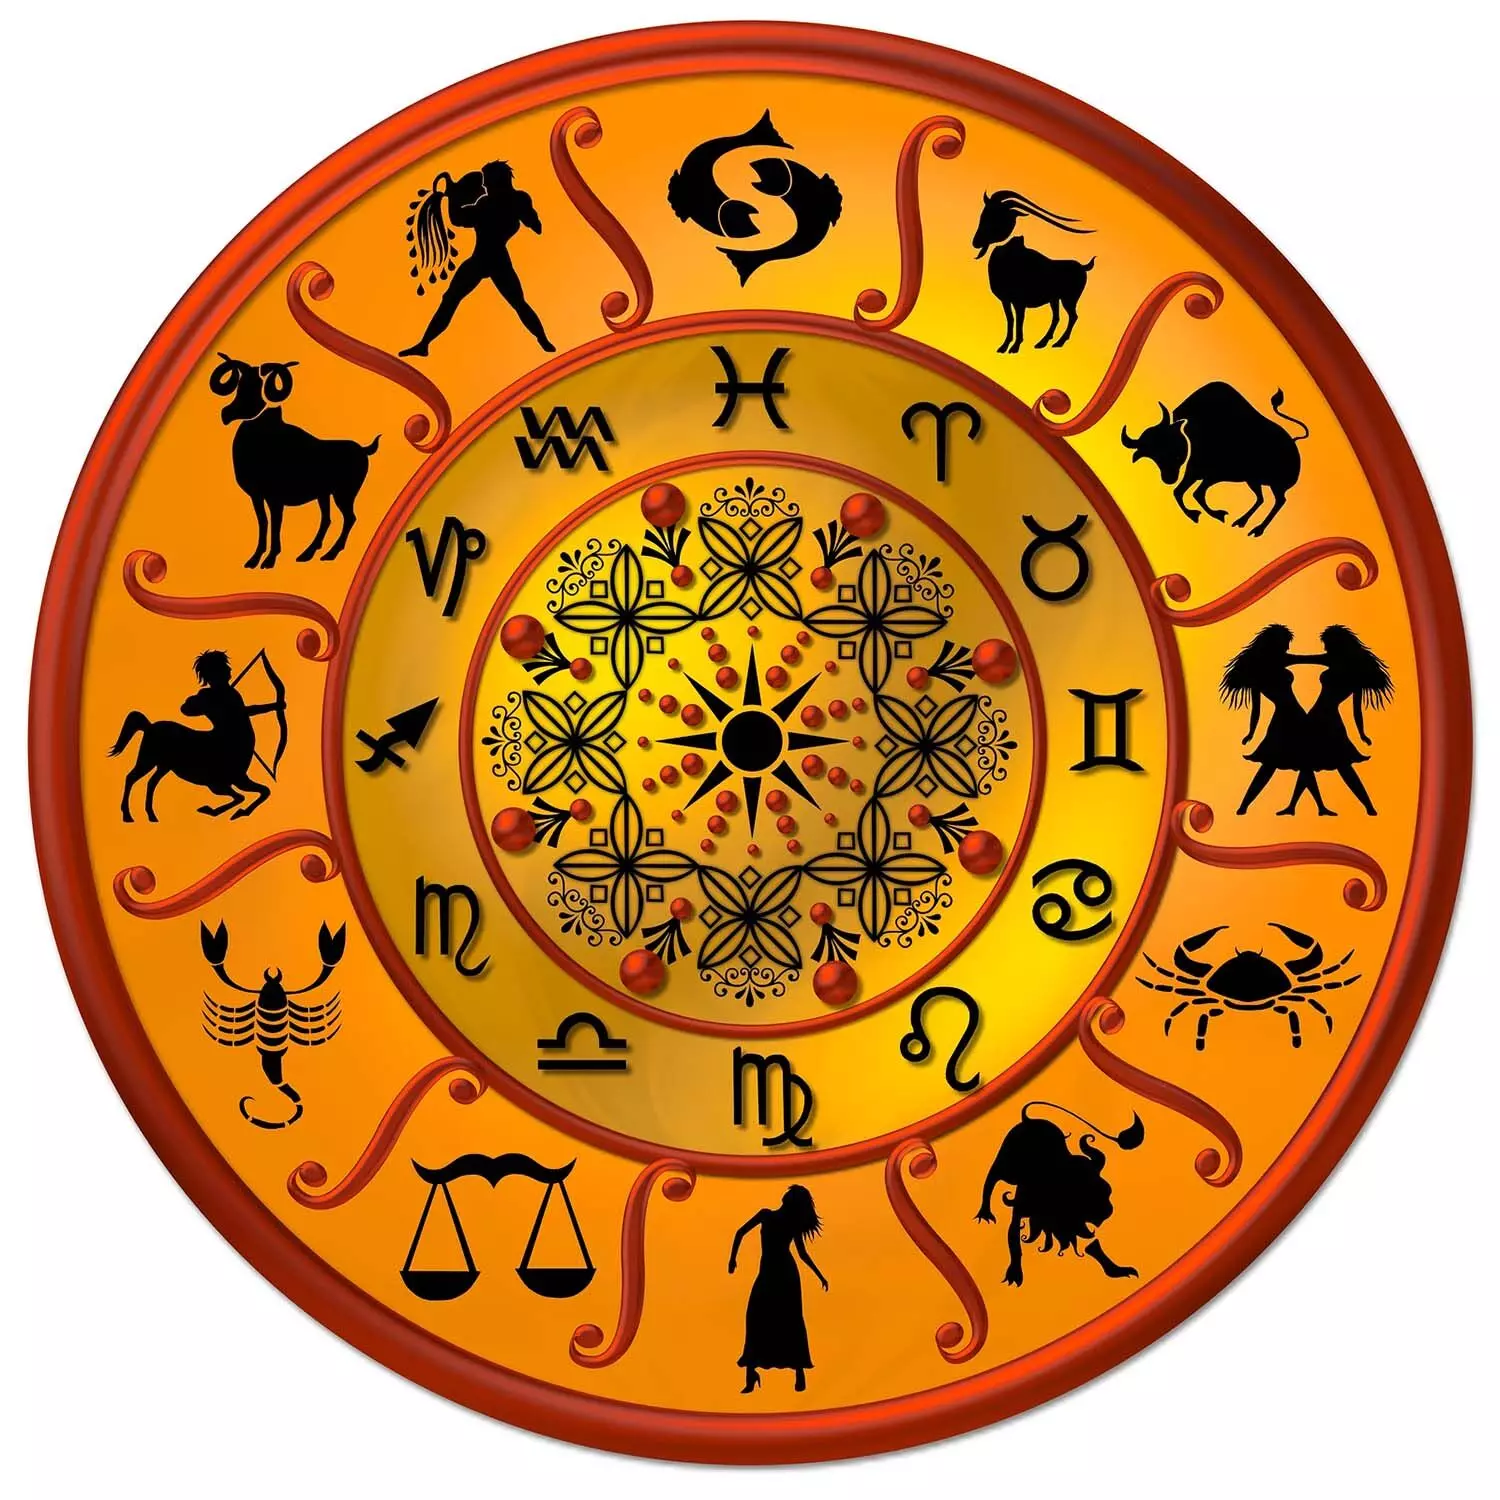 02 August  – Know your todays horoscope